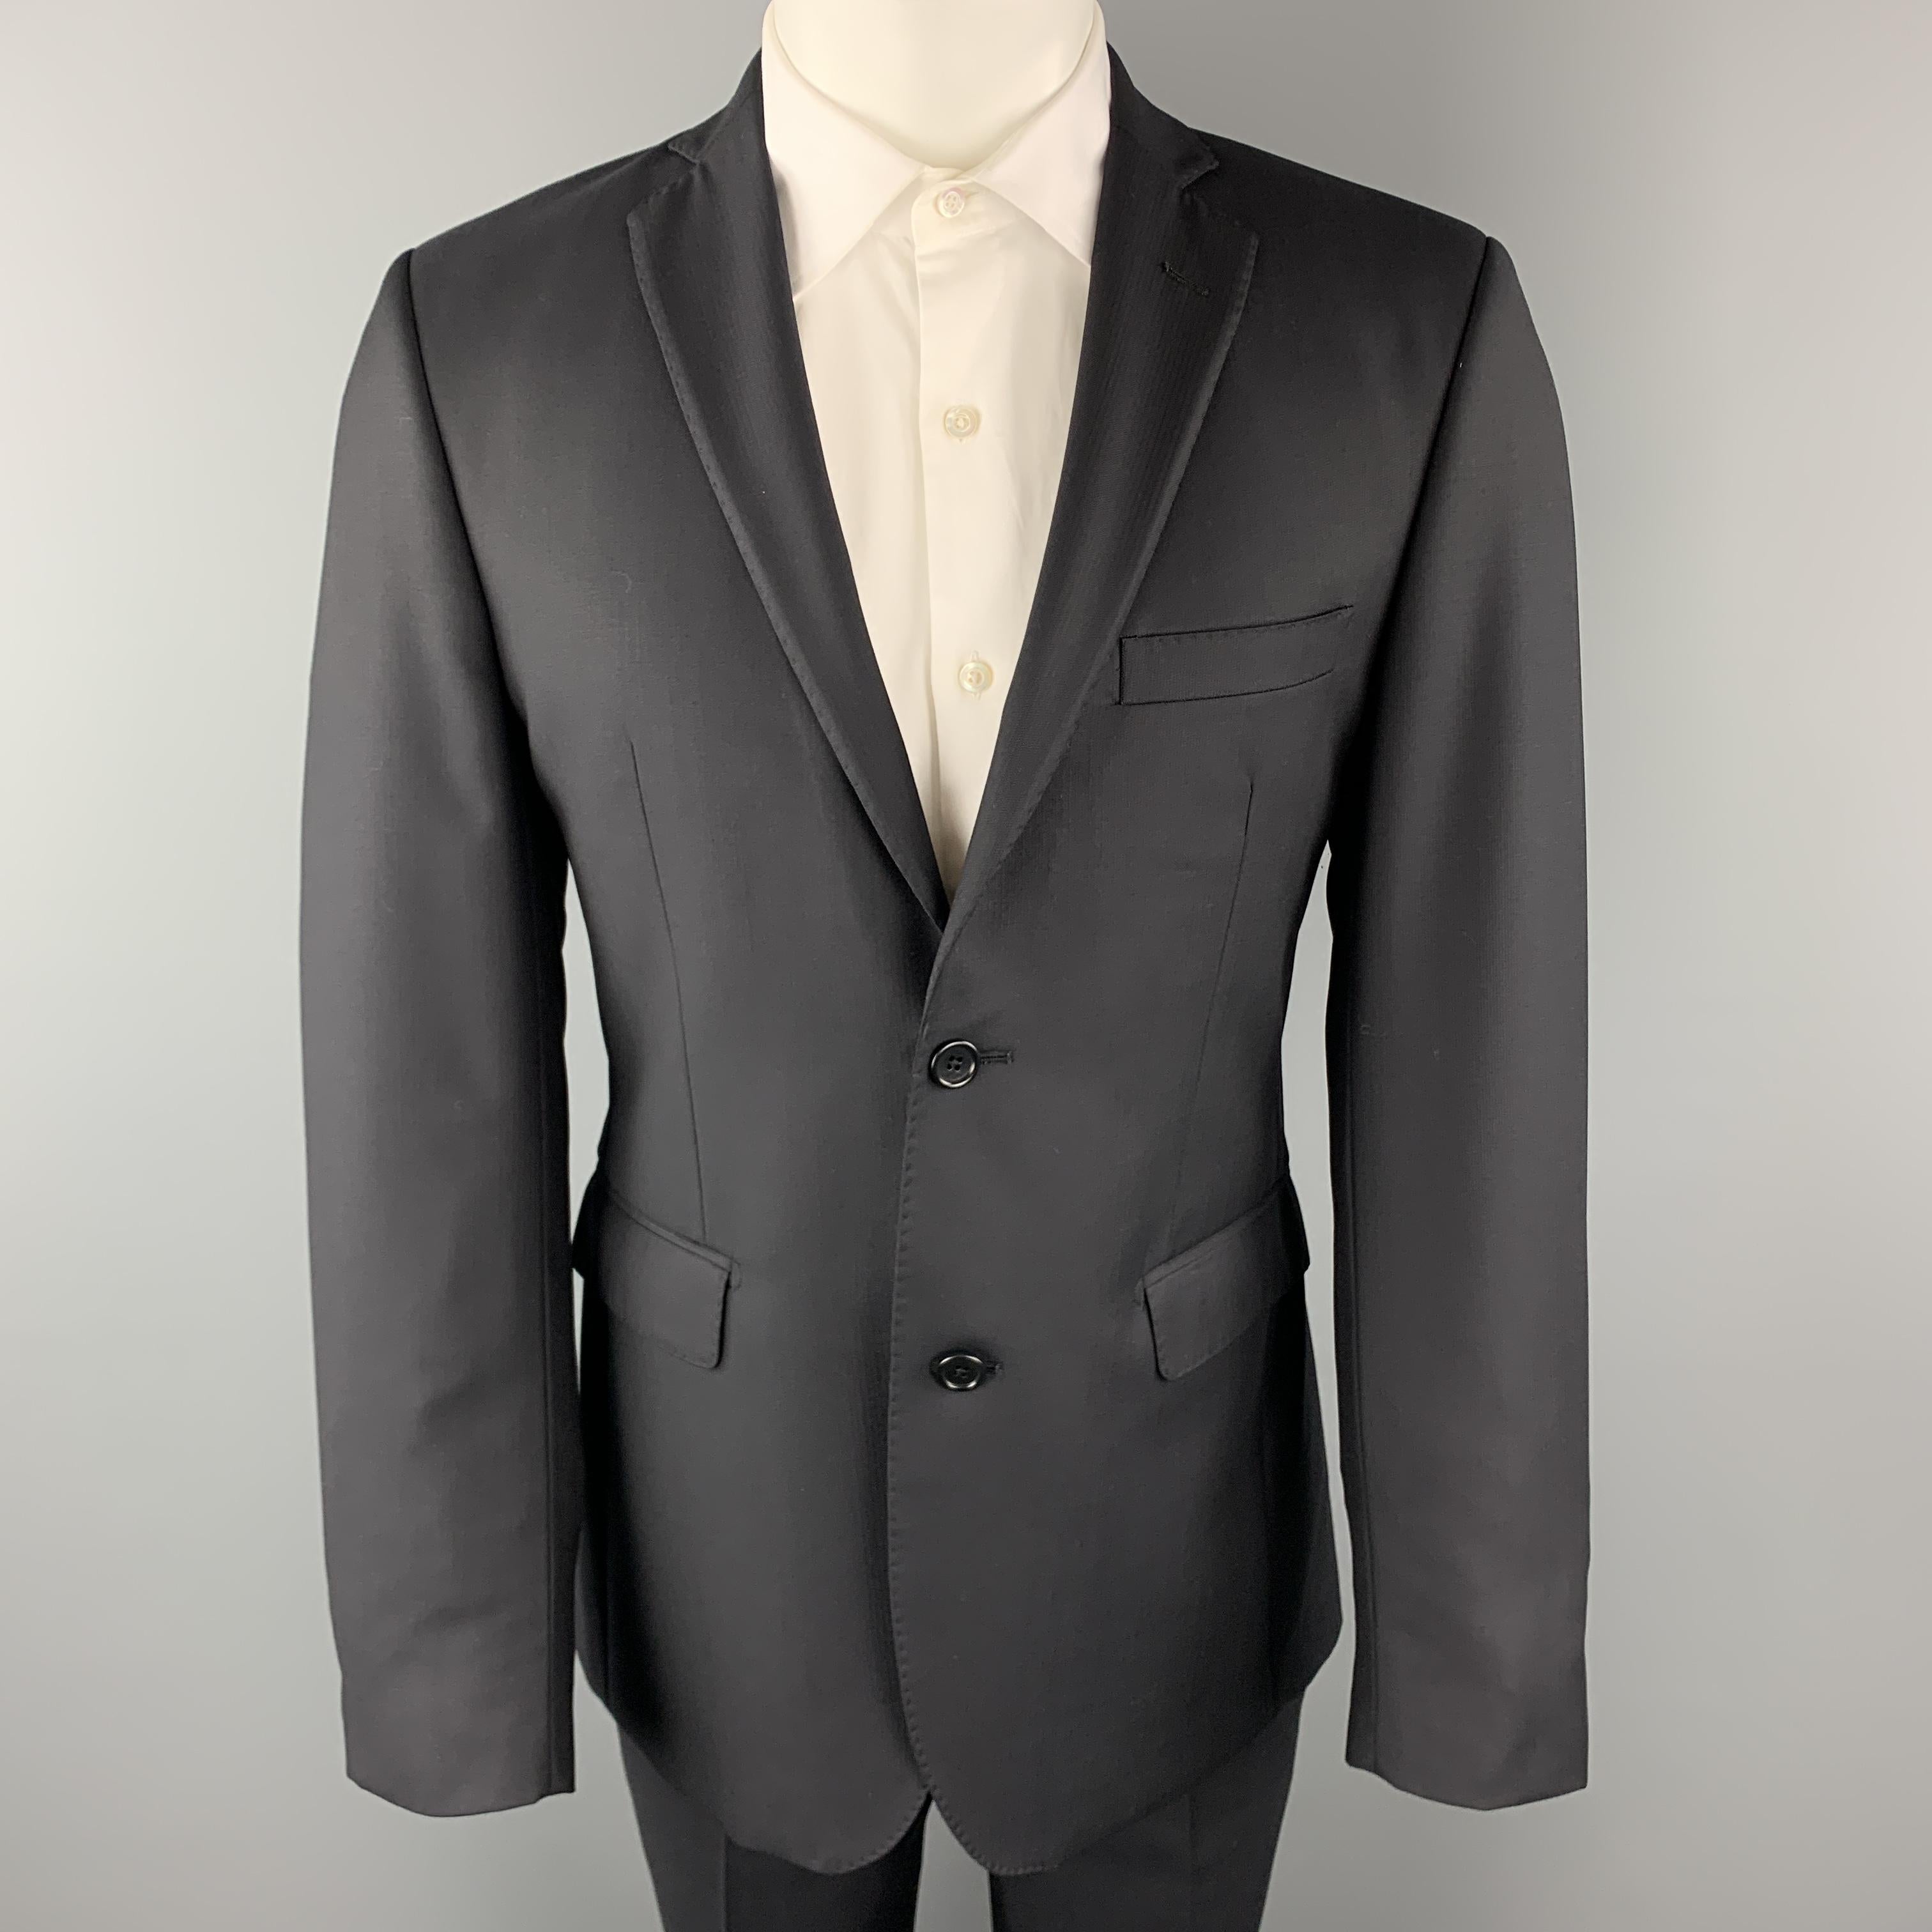 SAKE FIFTH AVENUE suit comes in black micro-herringbone ERMENEGILDO ZEGNA wool and includes a single breasted, two button sport coat with a notch lapel and matching flat front trousers. Made in Italy.

Excellent Pre-Owned Condition.
Marked: US